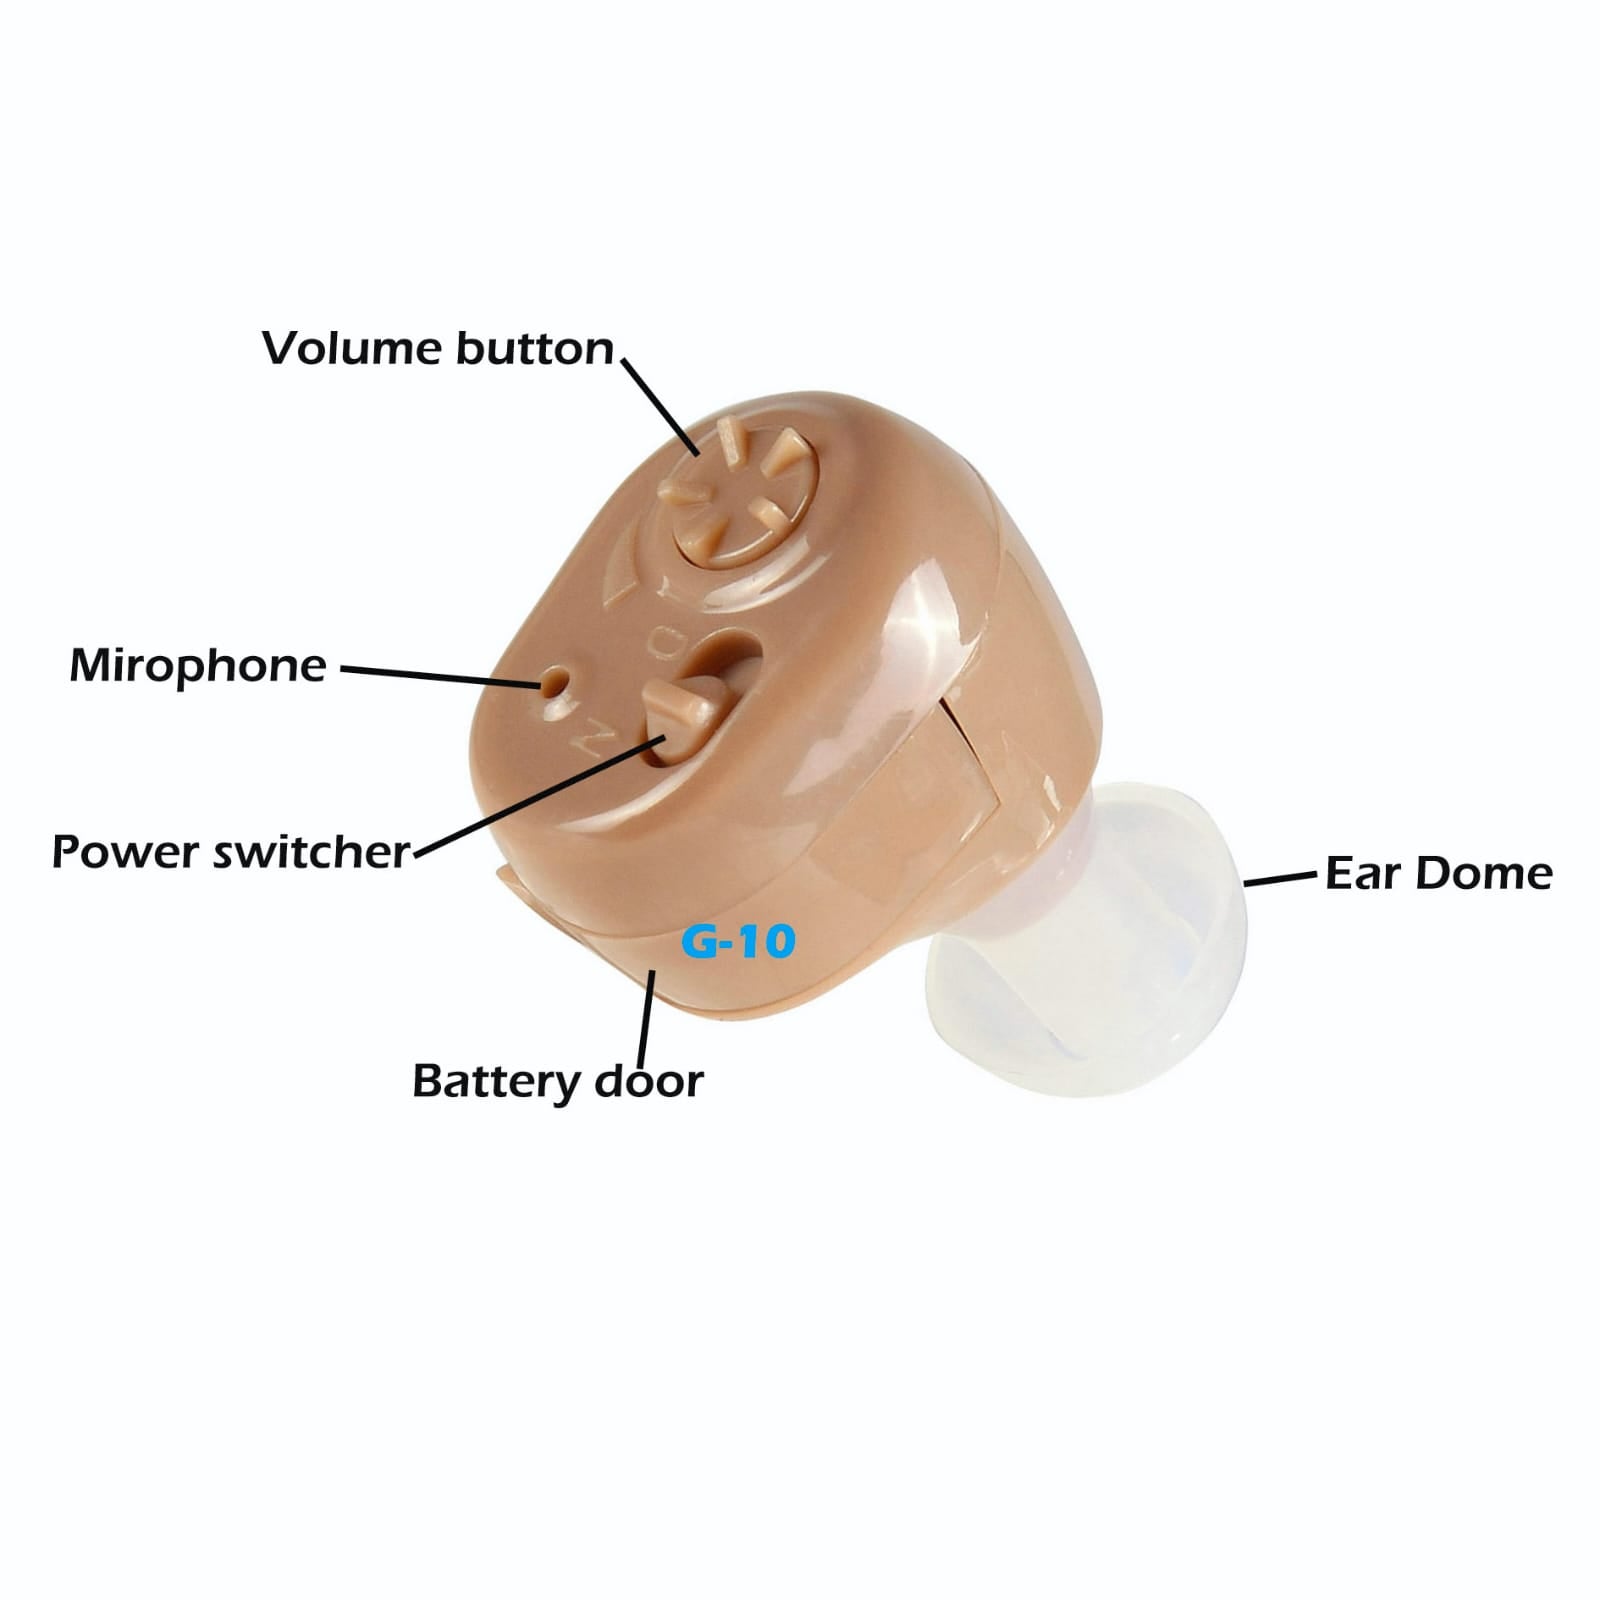 New Budget Class Hearing Aids, good quality at affordable prices. e-EAR-ITE-10 Hearing Aid Designed and Engineered in the USA Sold 50,000+ worldwide